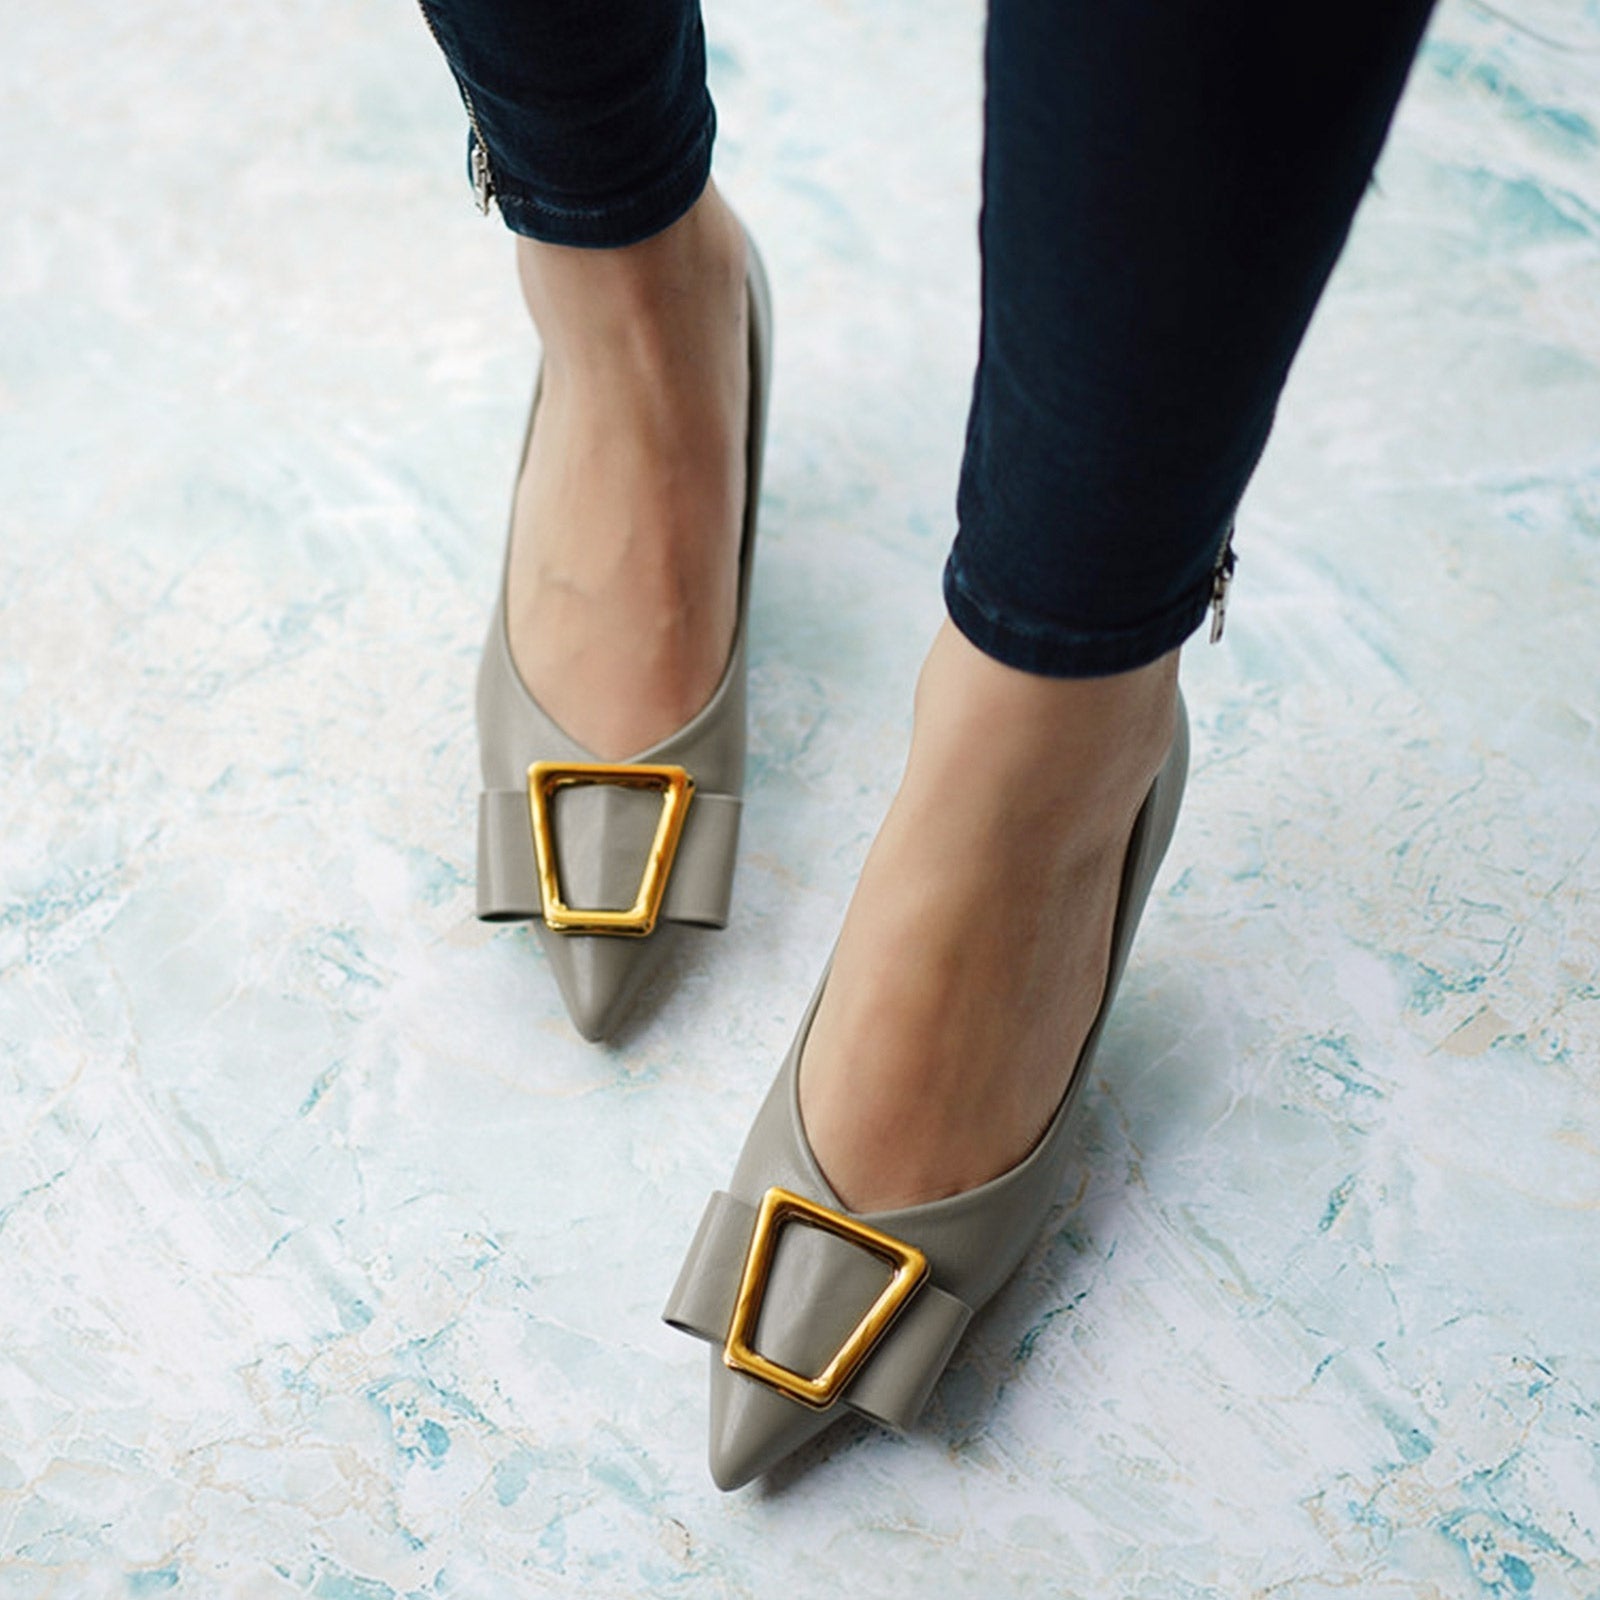  Grey Women Pumps with geometric designs, a sleek and fashionable option for city living